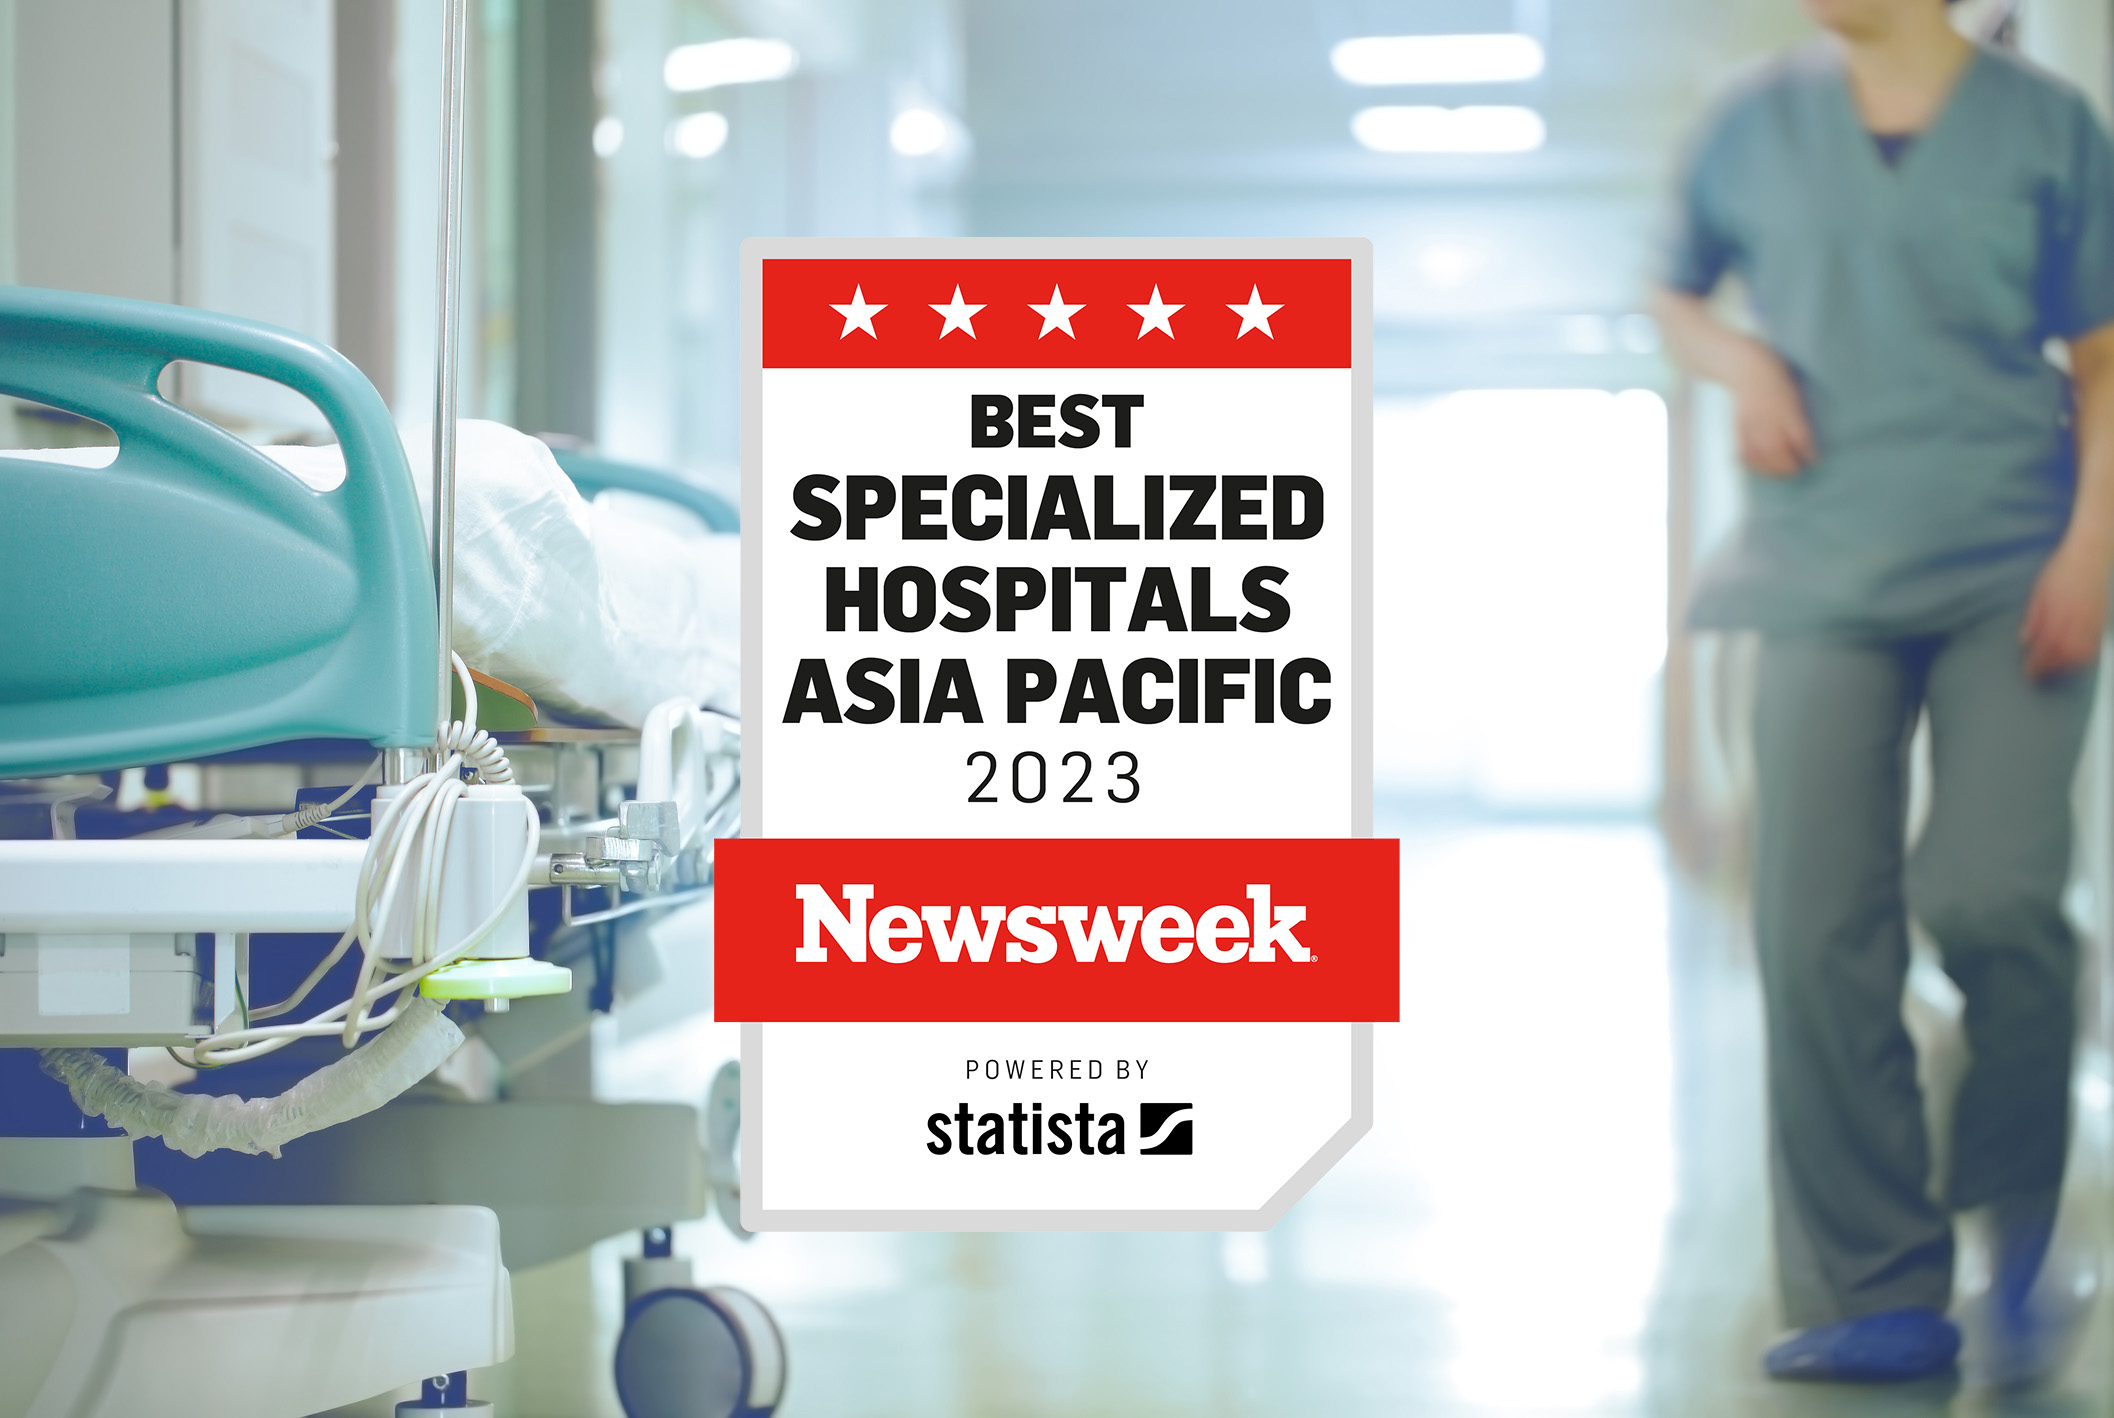 Best Specialized Hospitals Asia Pacific 2023 SurveyImage